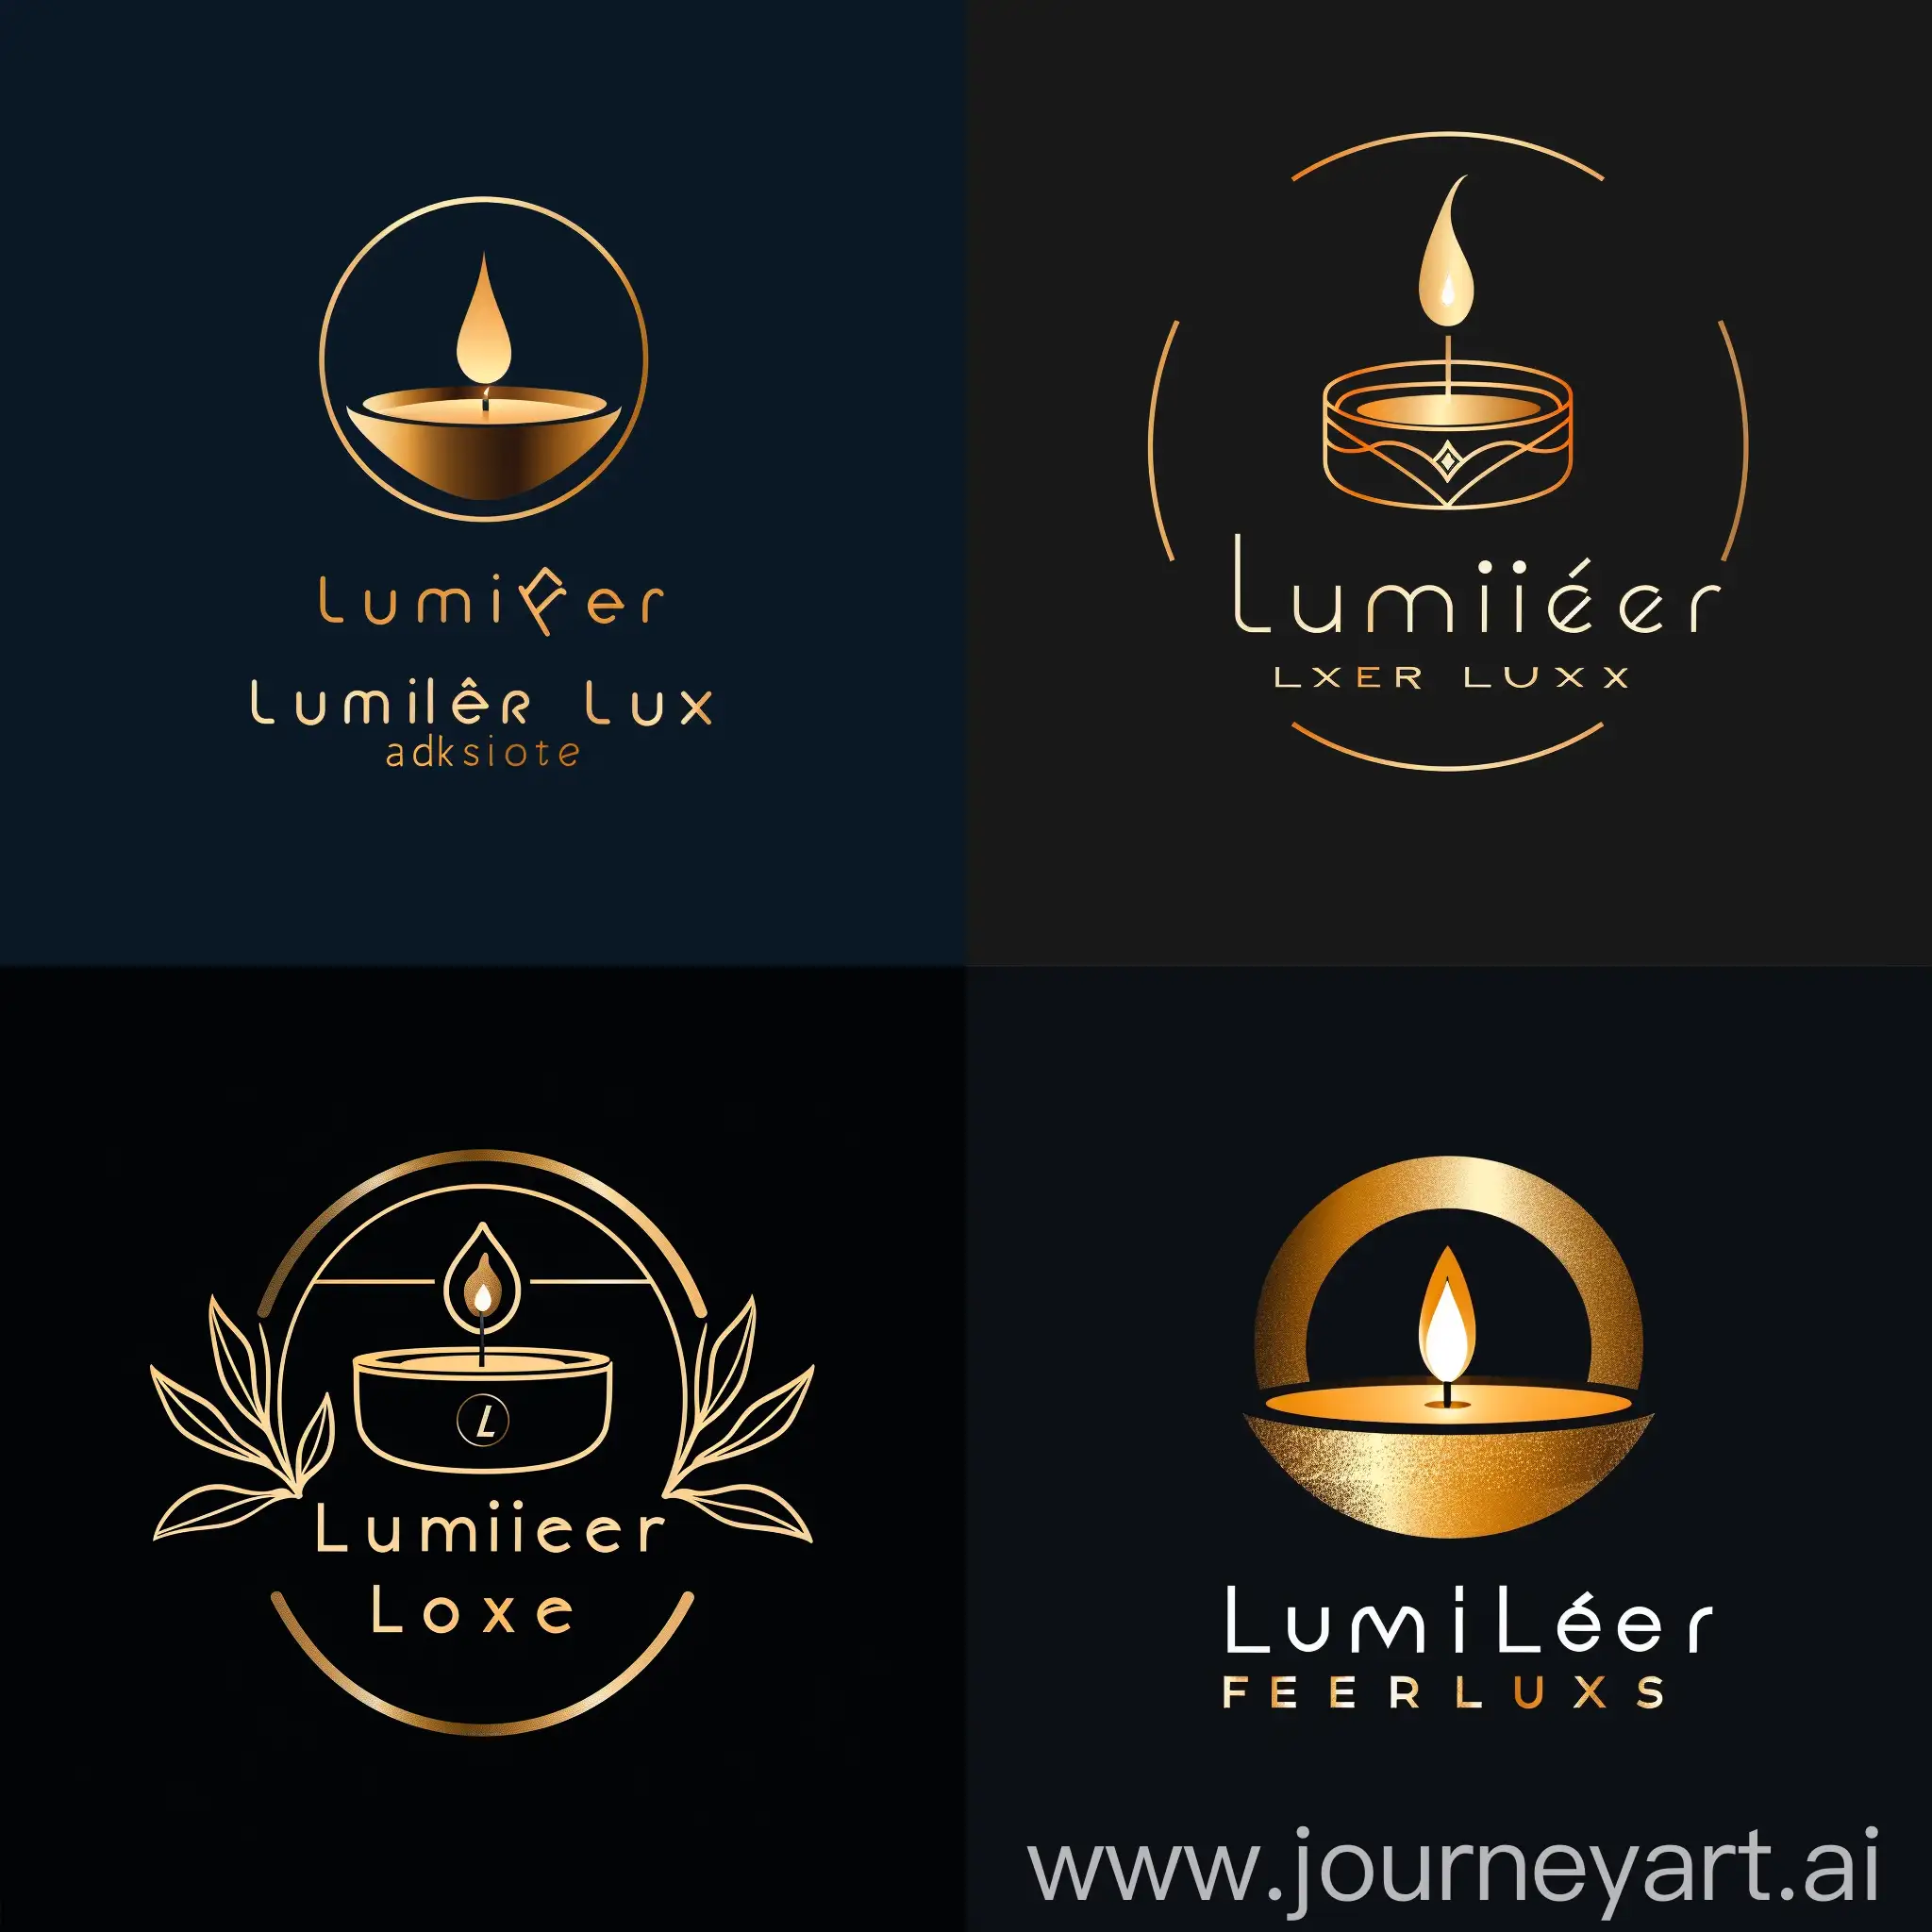 Create a logo for ‘Lumièr Luxe,’ a new business offering luxurious, elegant handcrafted candles. It should reflect light, luxury, and artisanal quality. What’s your suggestion?”